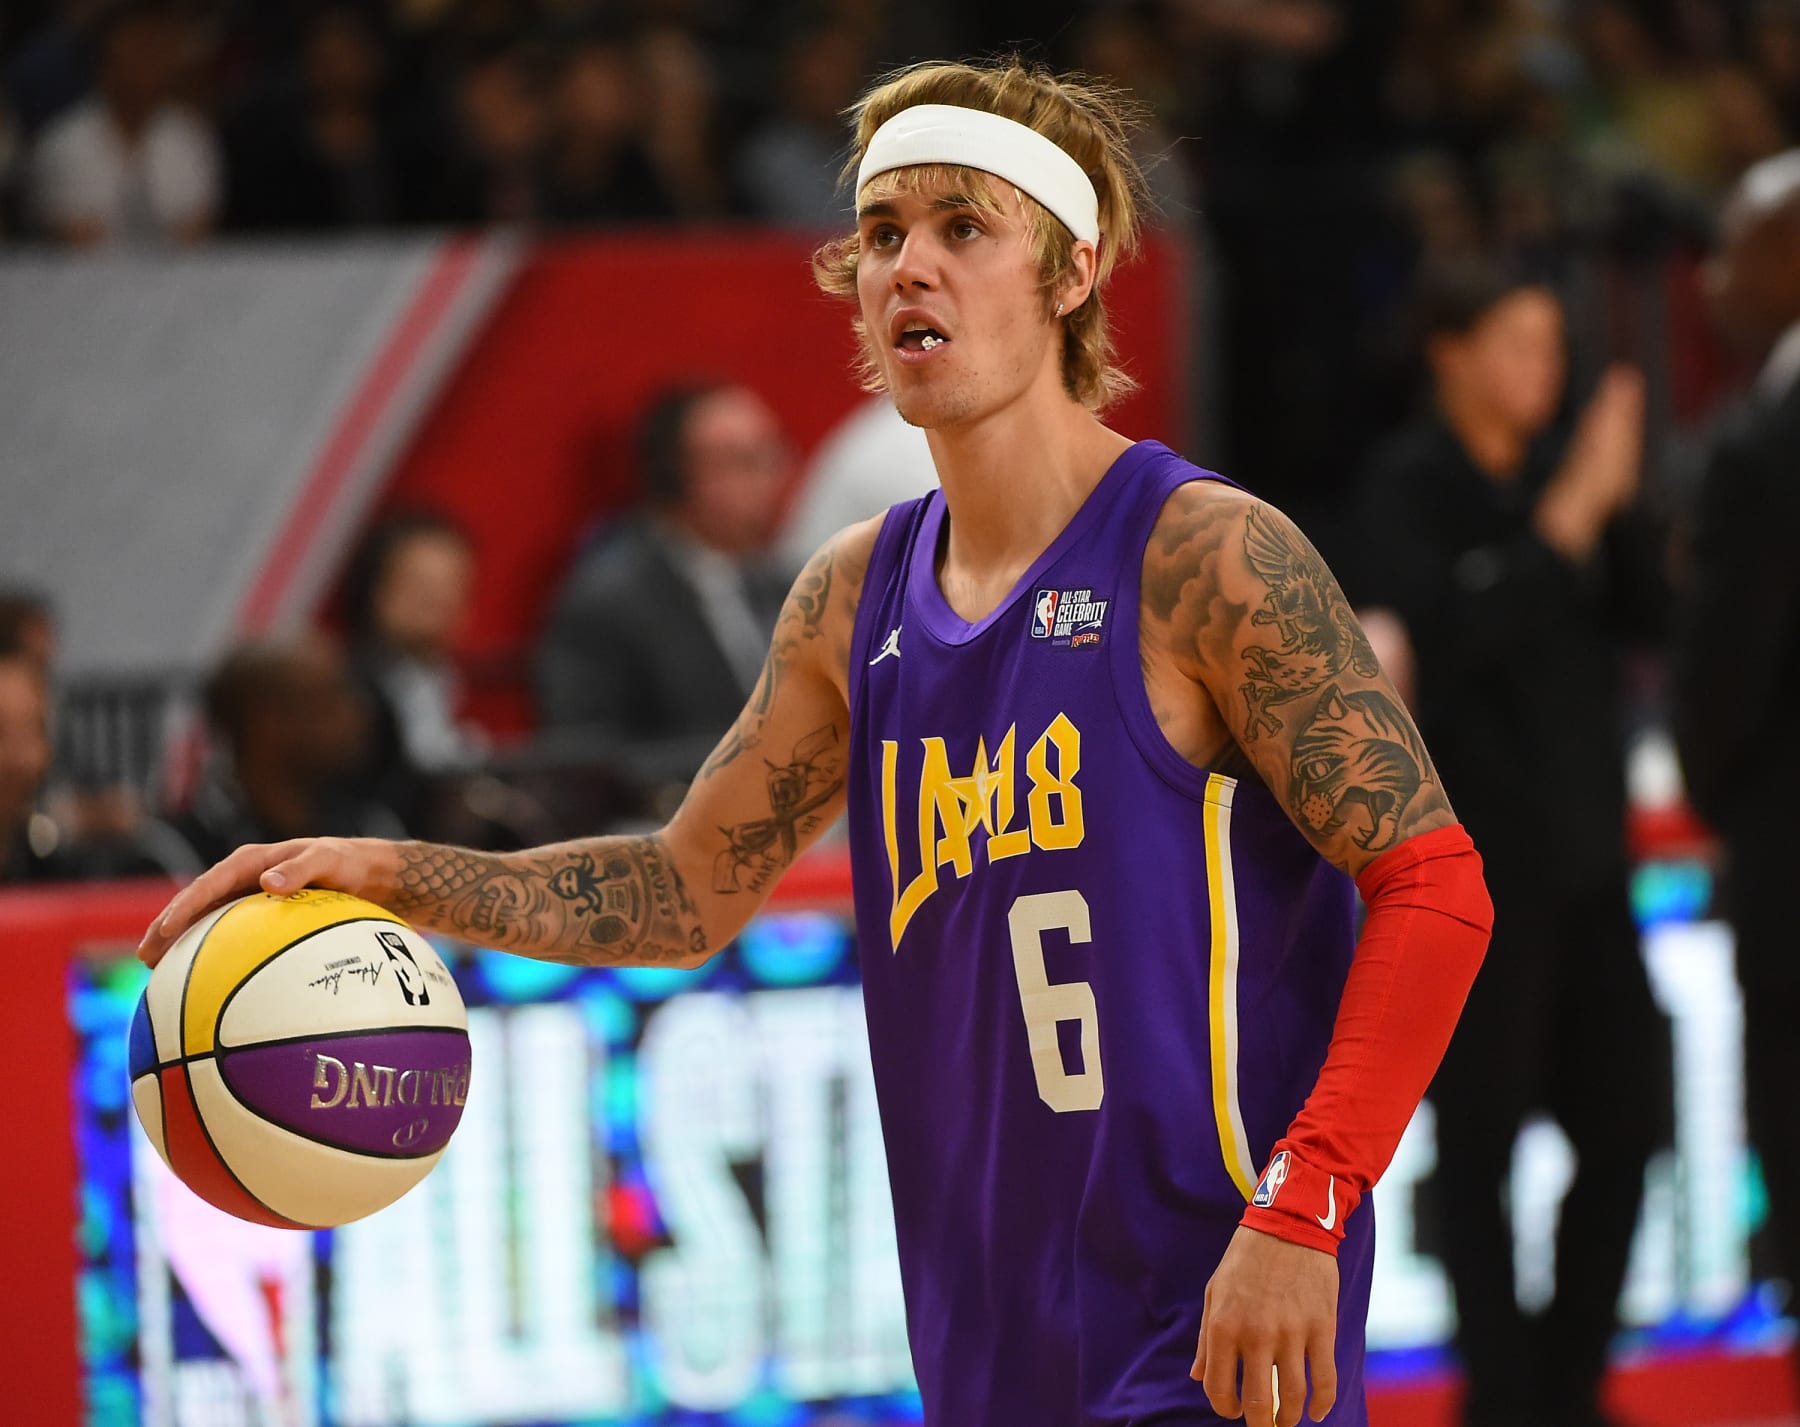 justin-bieber-impresses-with-basketball-skills-at-l-a-game